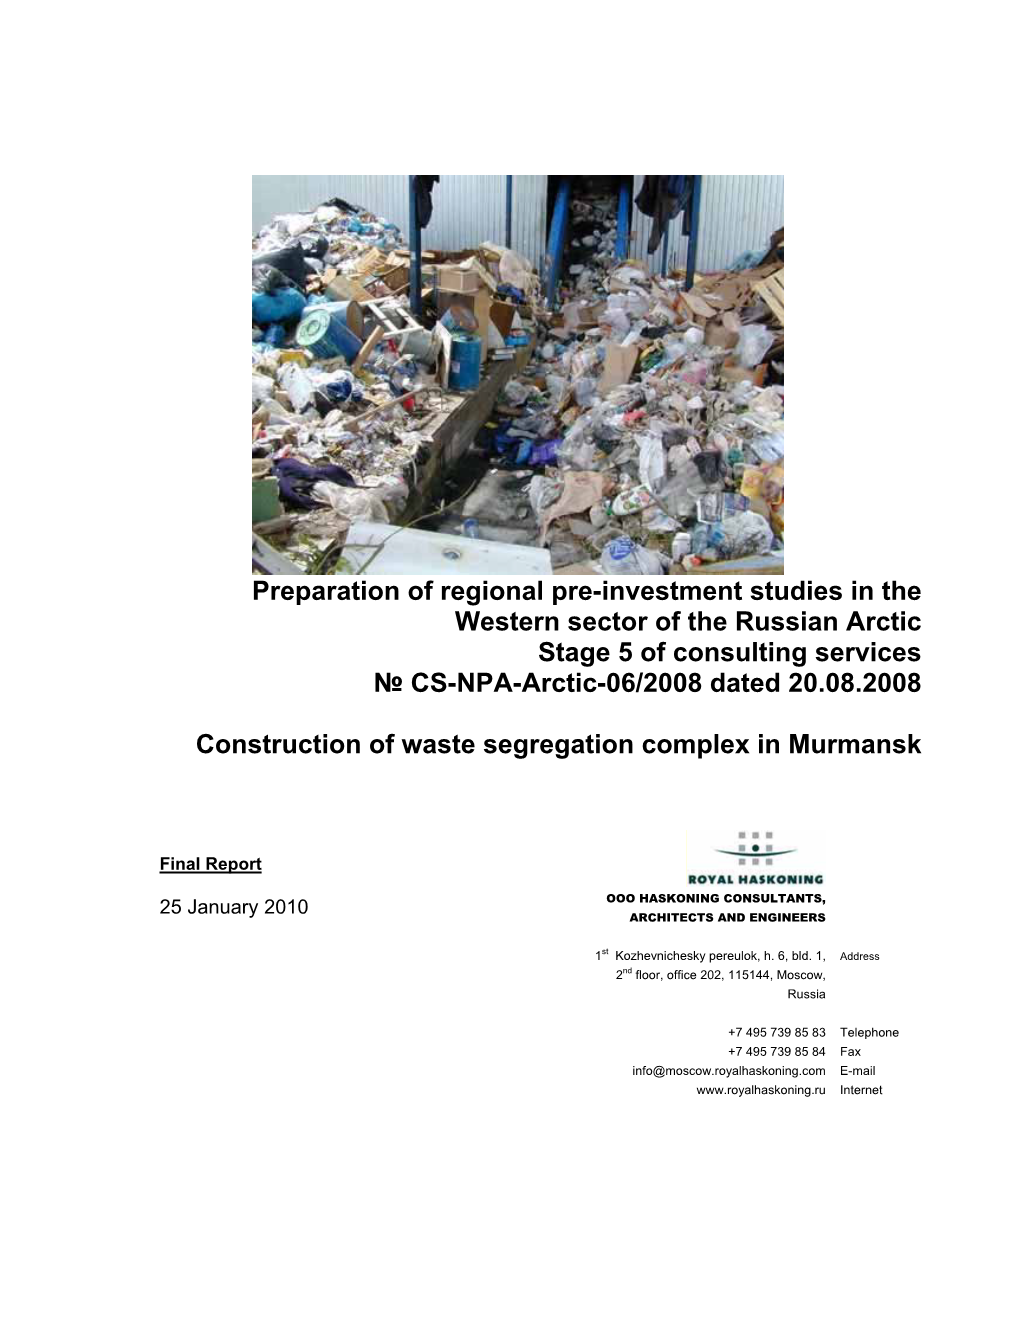 Preparation of Regional Pre-Investment Studies in the Western Sector of the Russian Arctic Stage 5 of Consulting Services № СS-NPA-Arctic-06/2008 Dated 20.08.2008